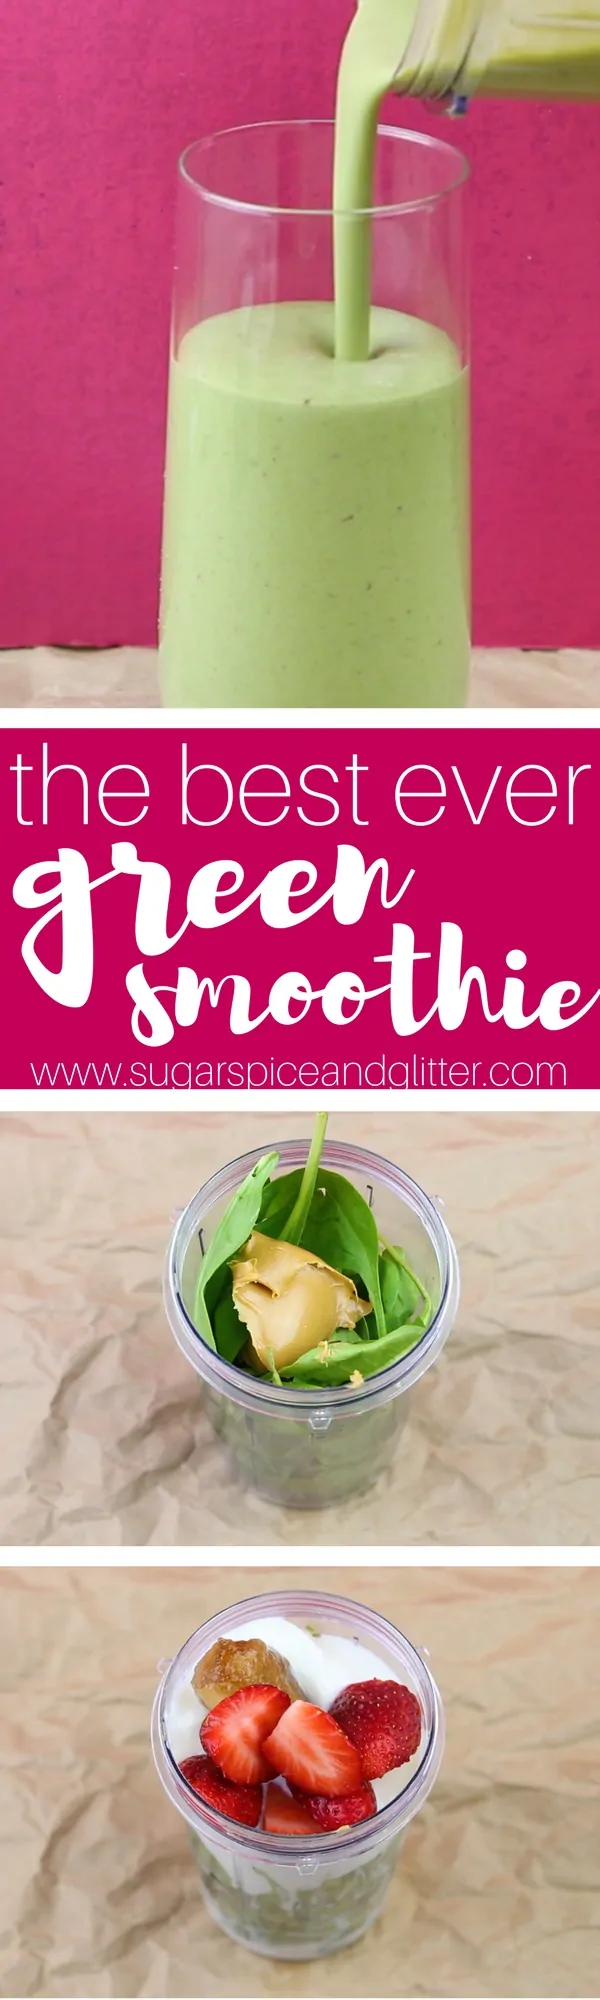 This BEST EVER Green smoothie recipe will revolutionize your mornings - helping you achieve your health goals with little effort or sacrifice. Despite having two cups of spinach, it tastes just like a peanut butter banana milkshake